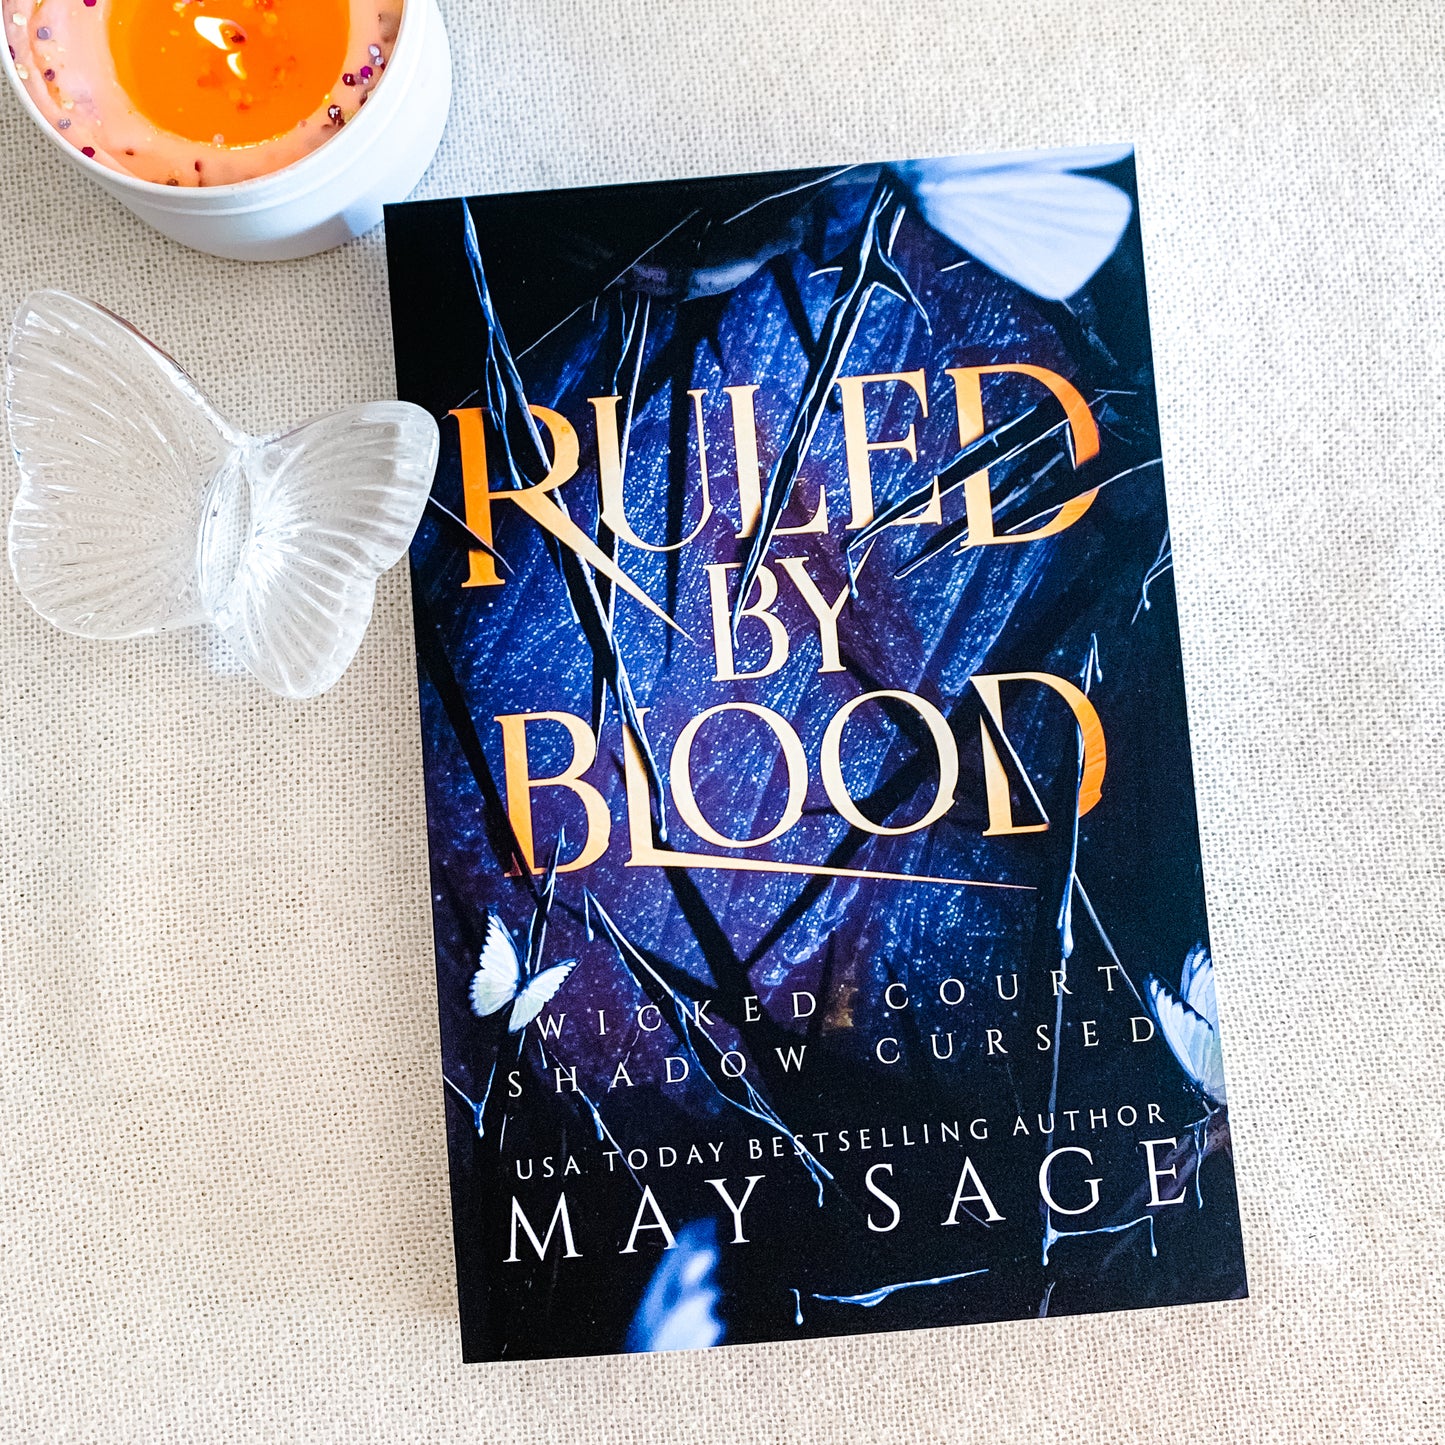 Ruled by Blood by May Sage